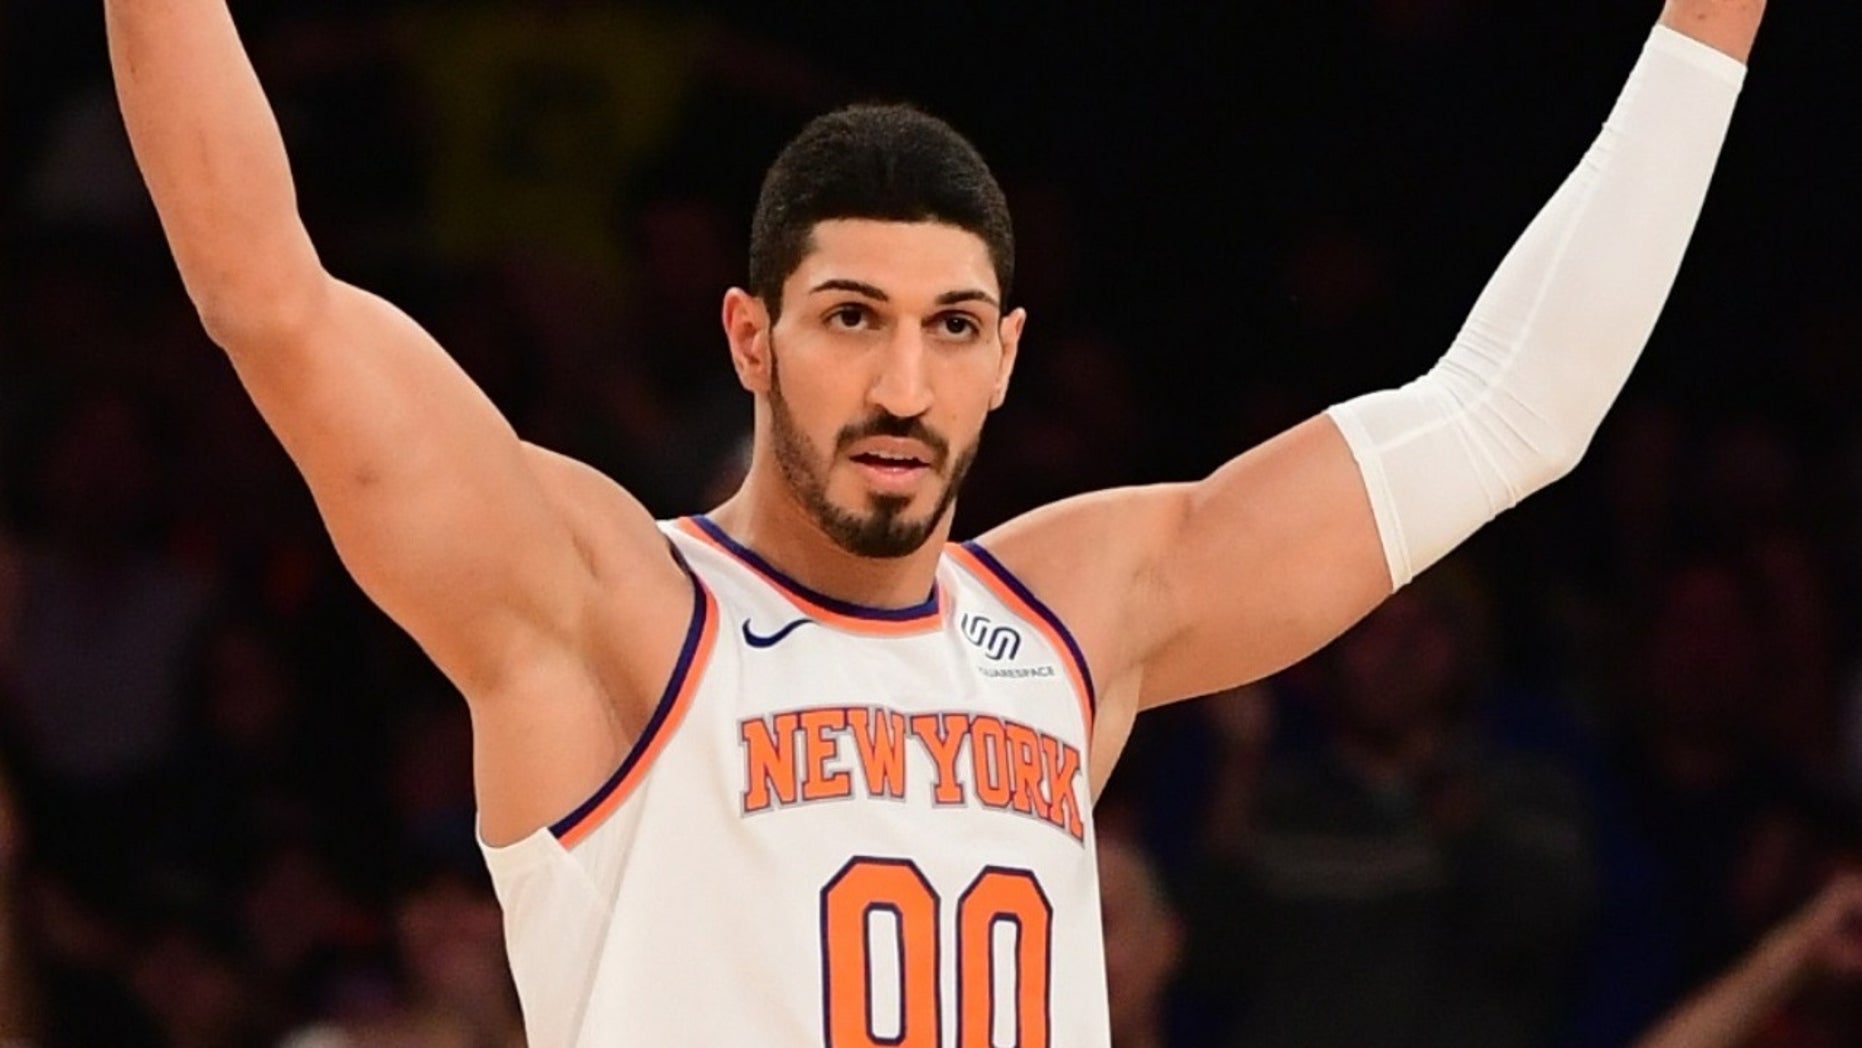 Knicks' Turkish star Enes Kanter to skip London trip ‘There’s a chance